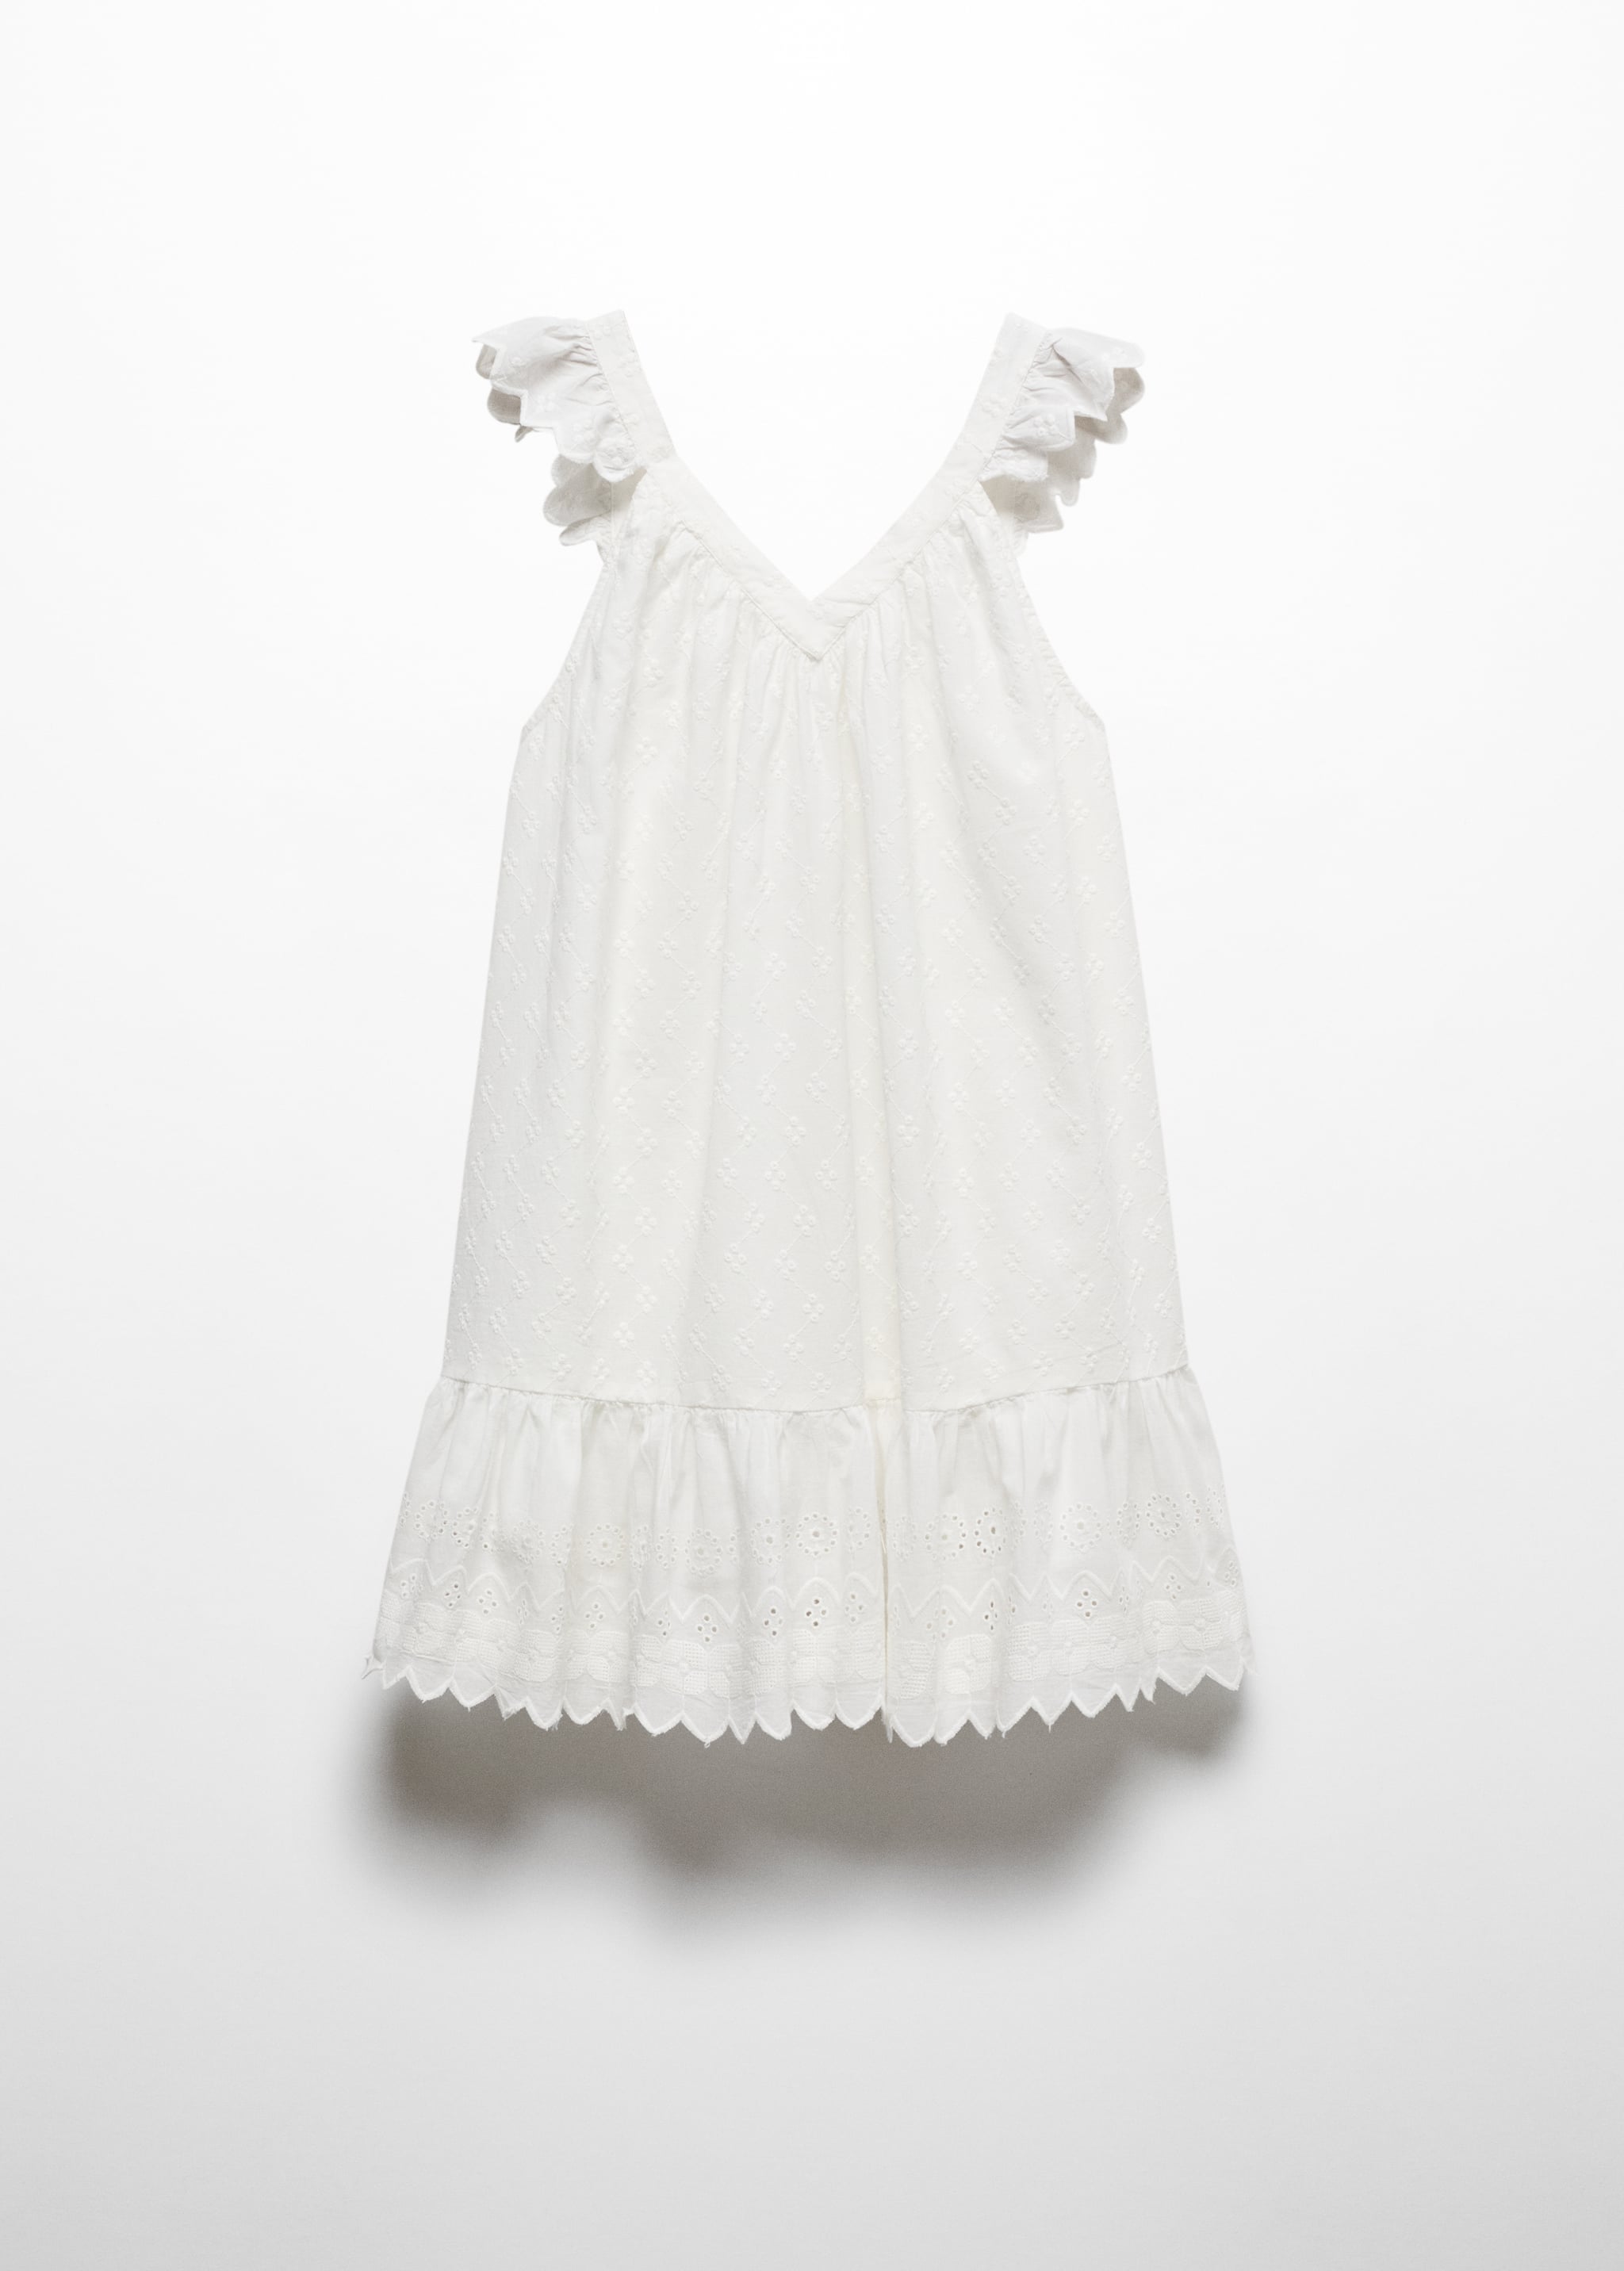 Broderie anglaise dress - Article without model